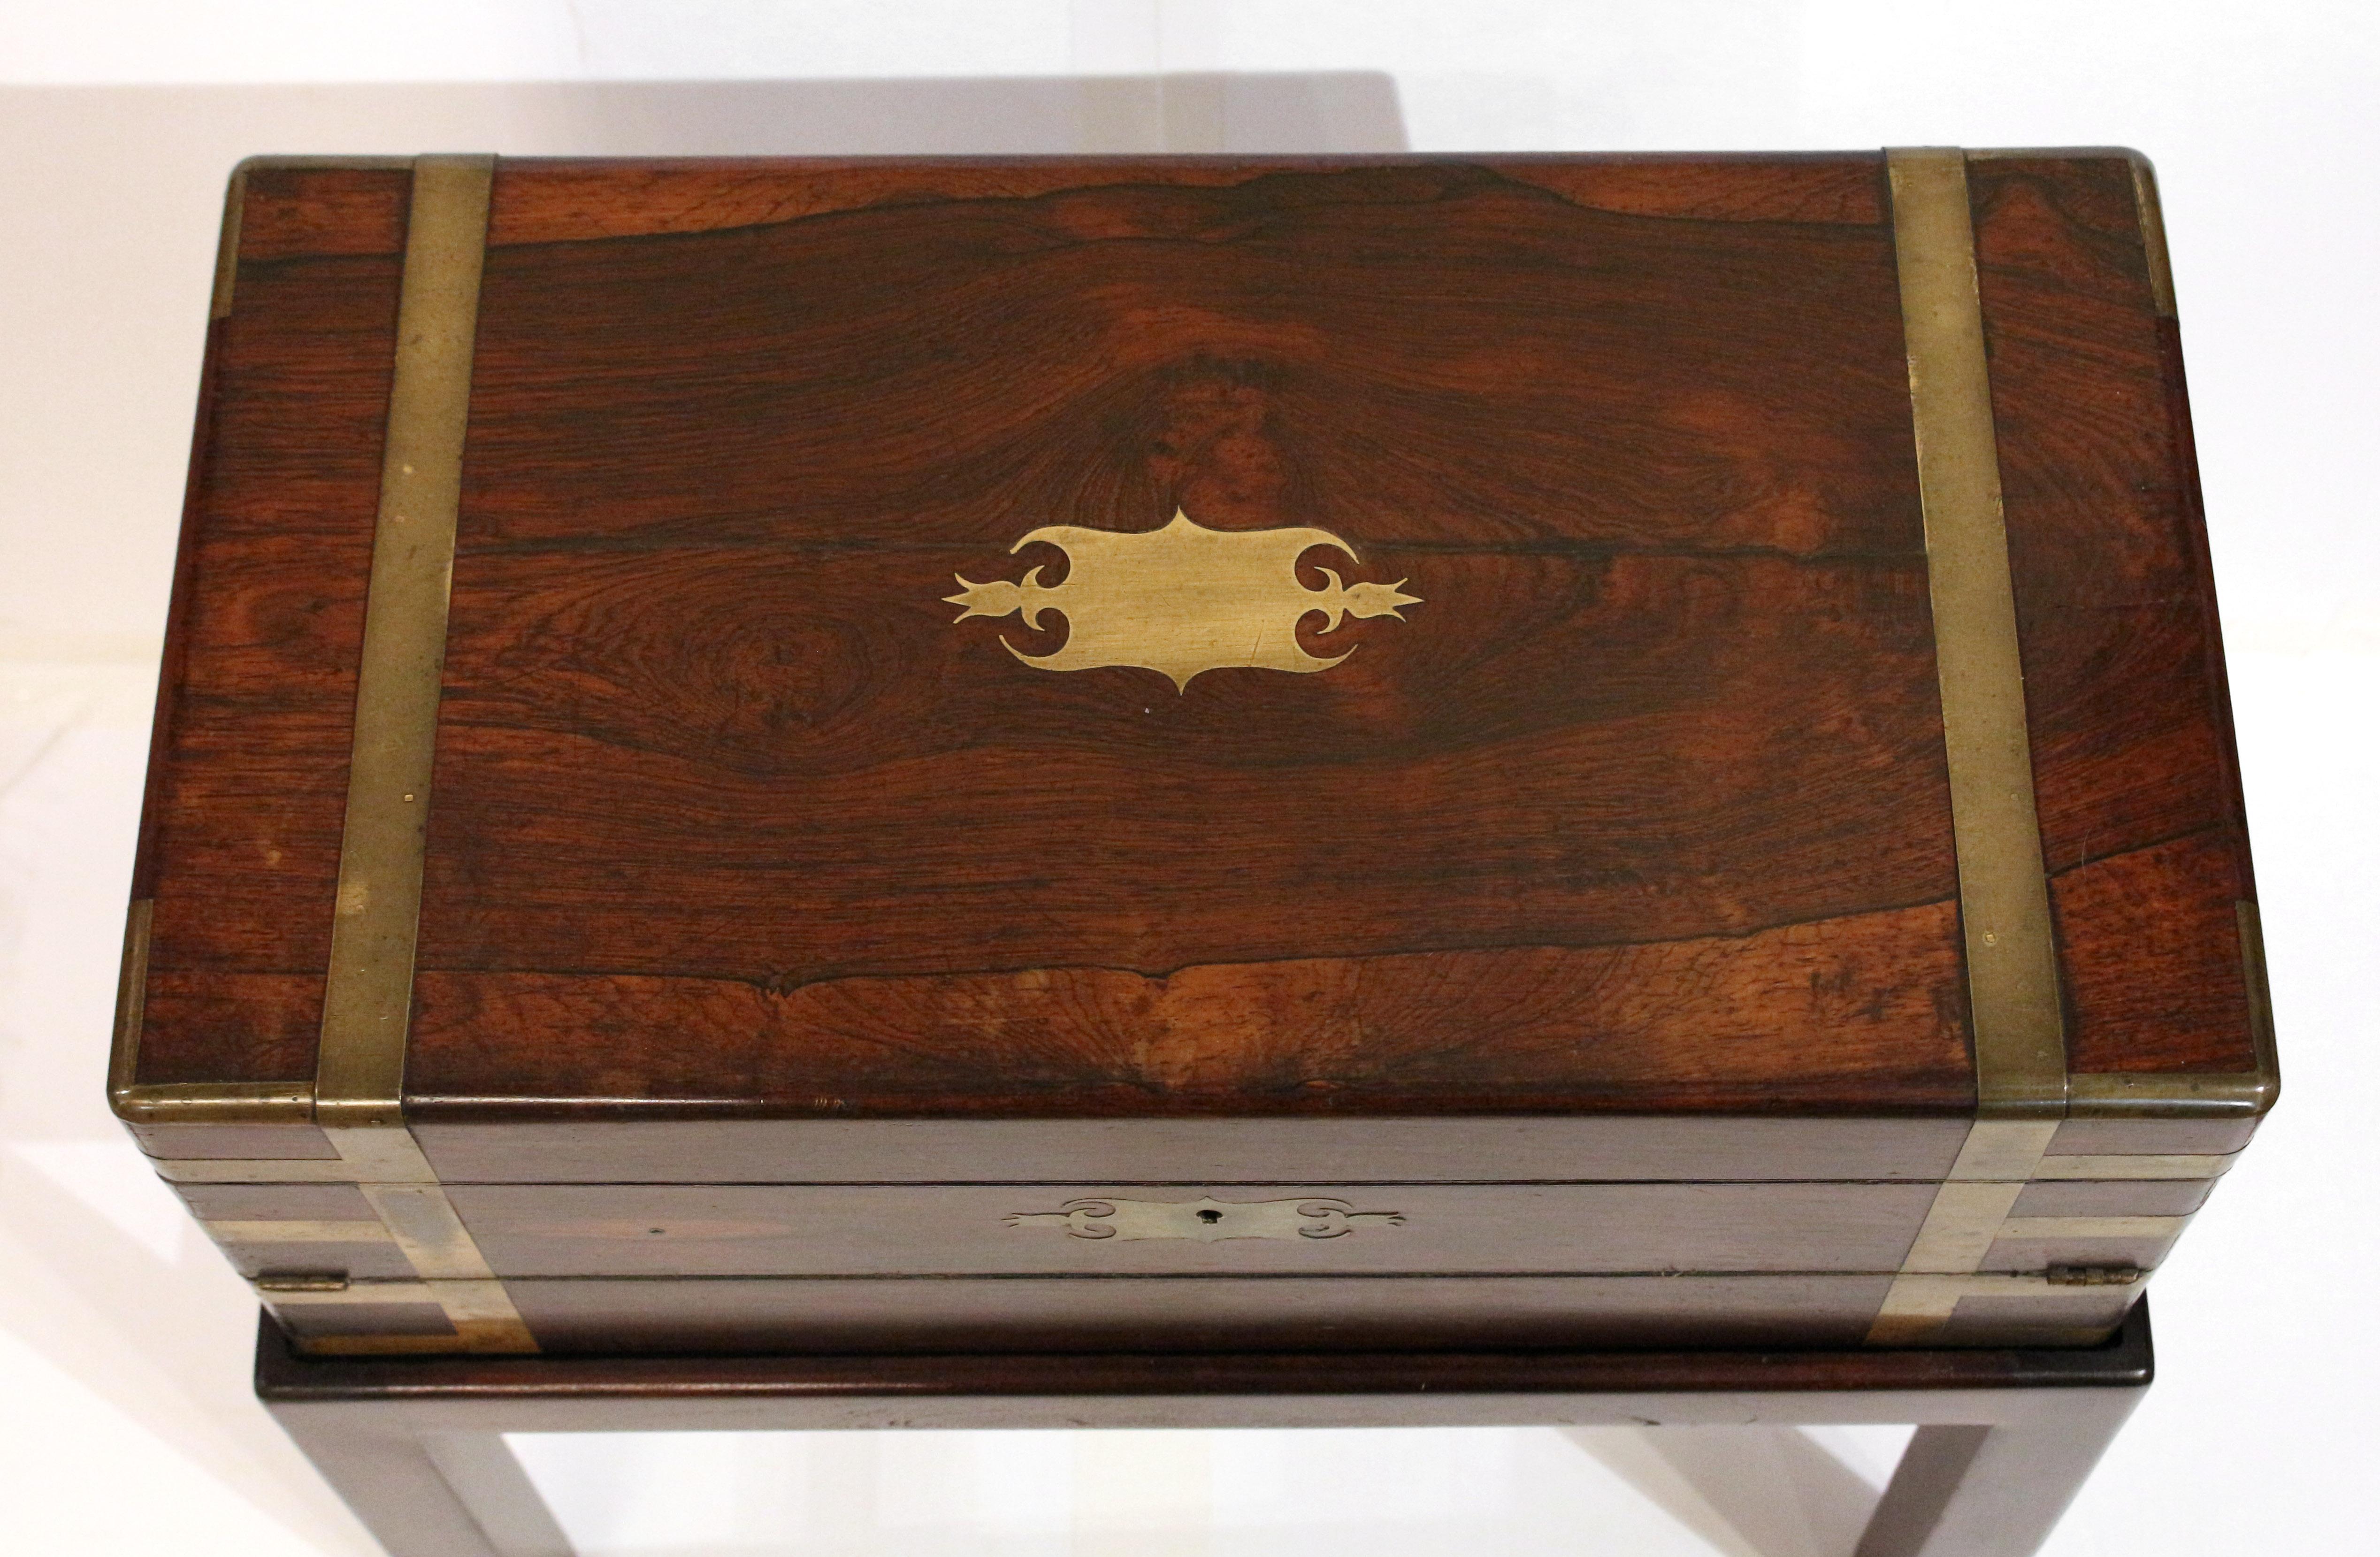 Early 19th century double fold campaign lap desk box on stand side table, English. A rarely found form. George III to Regency period. Rosewood. Gilt tooled black leather interior surfaces. Two inkwells. Extensive brass strapping, cartouche